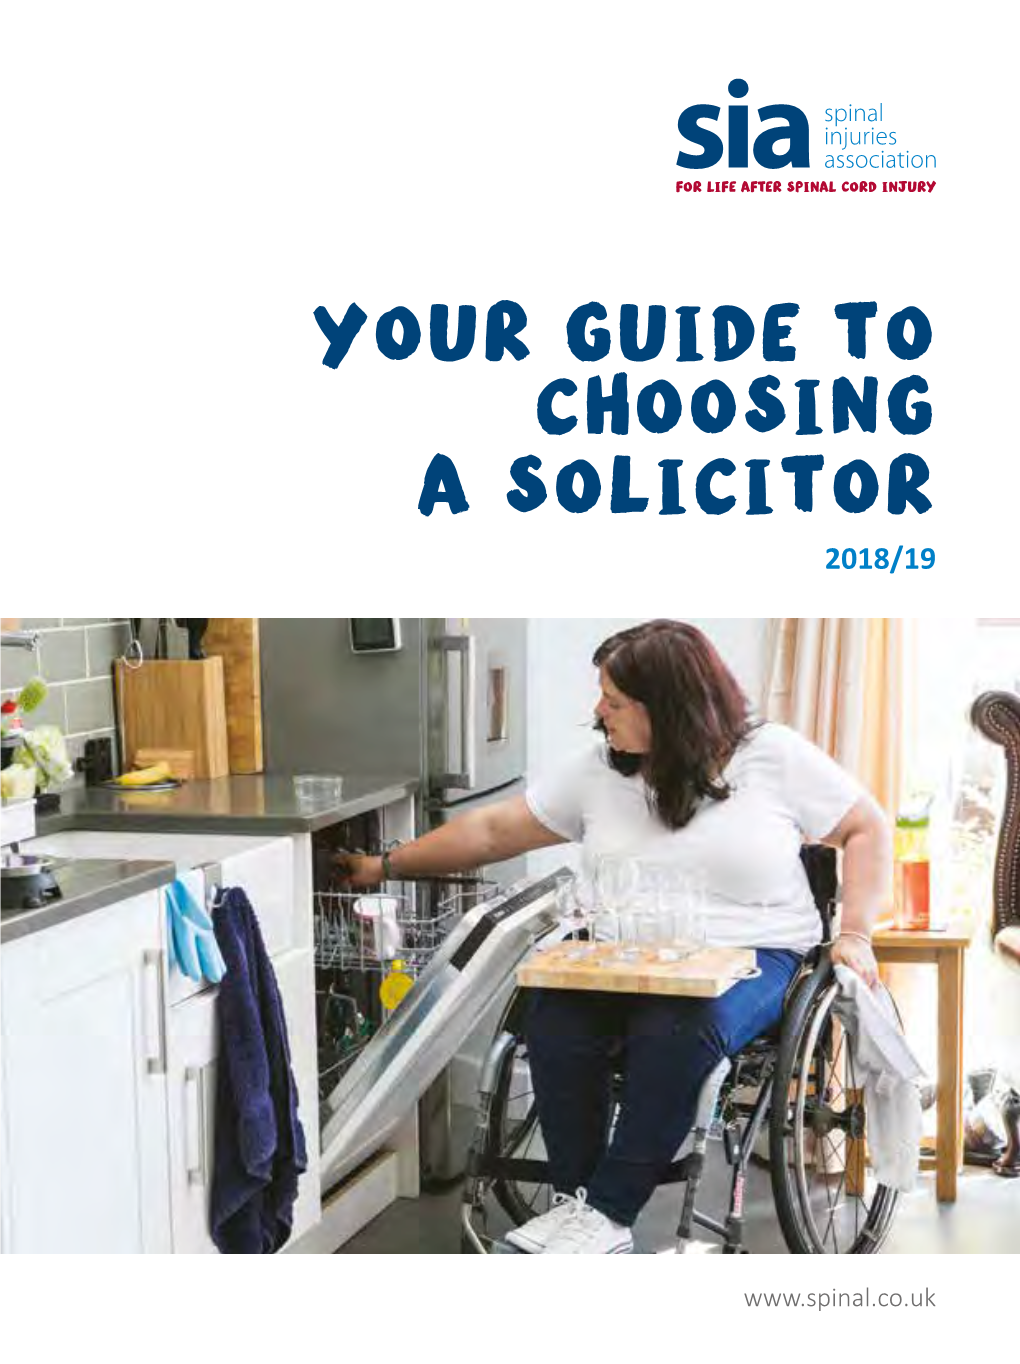 Your Guide to Choosing a Solicitor 2018/19